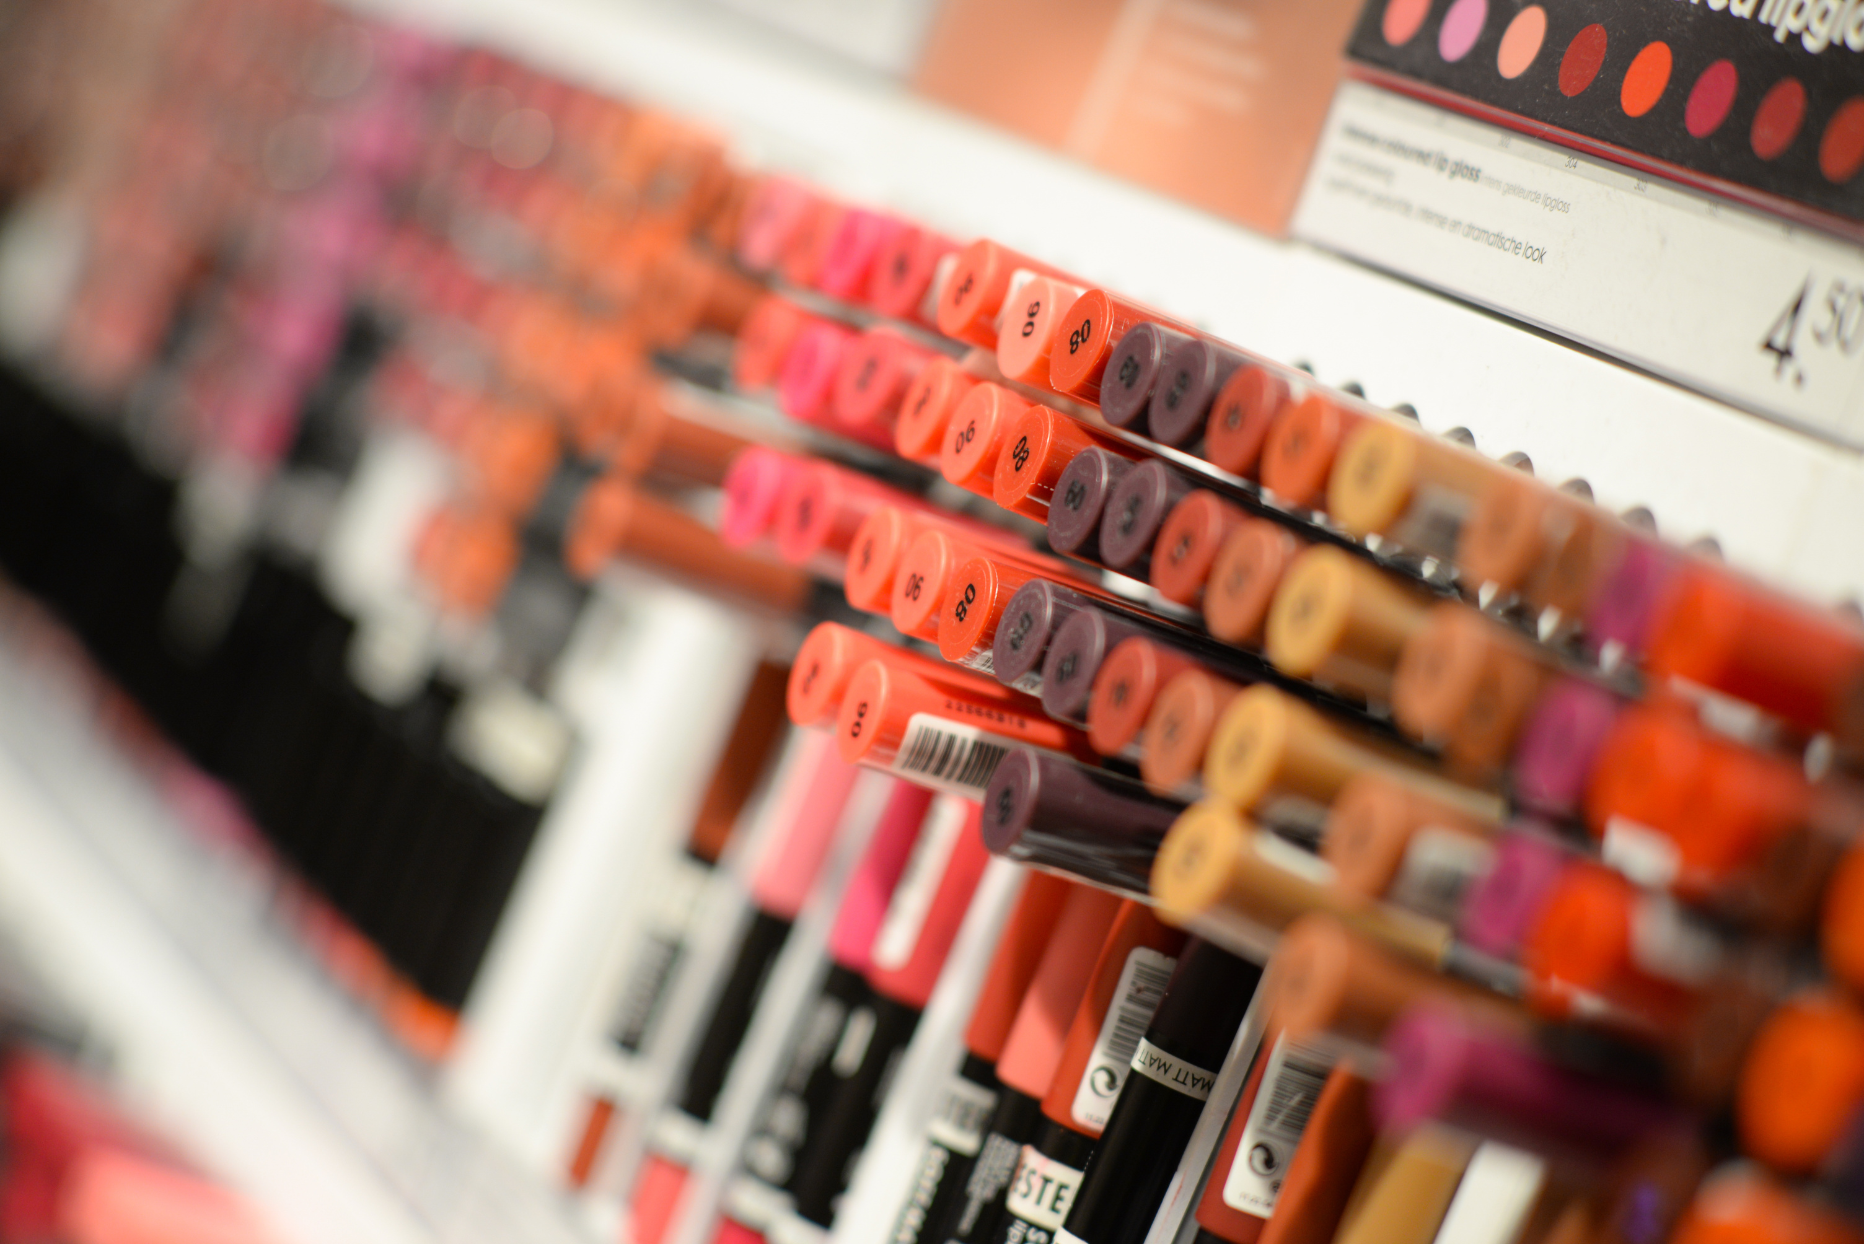 Cosmetics products